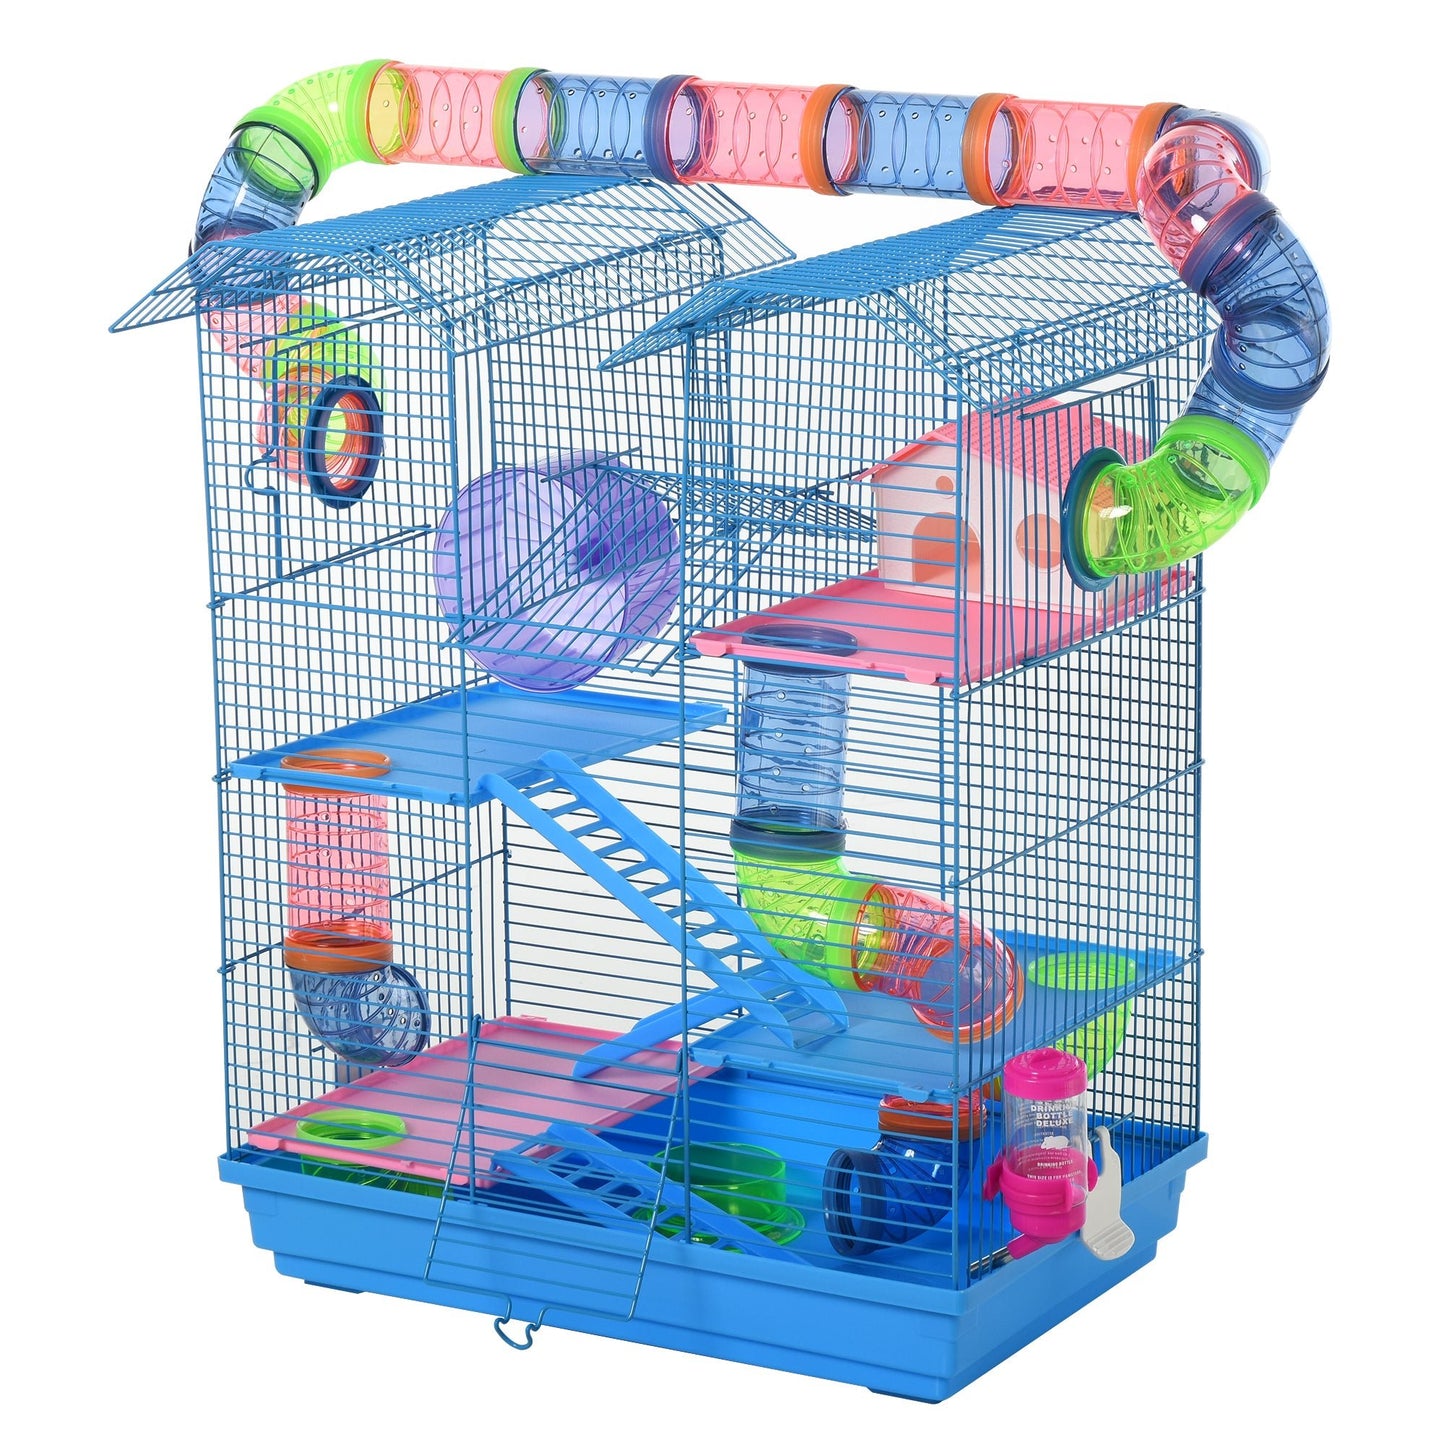 AOSOM-5 Tiers Hamster Cage Small Animal Rat House, Mice Mouse Habitat with Exercise Wheels, Tube, Water Bottles & Ladder, Blue - Outdoor Style Company